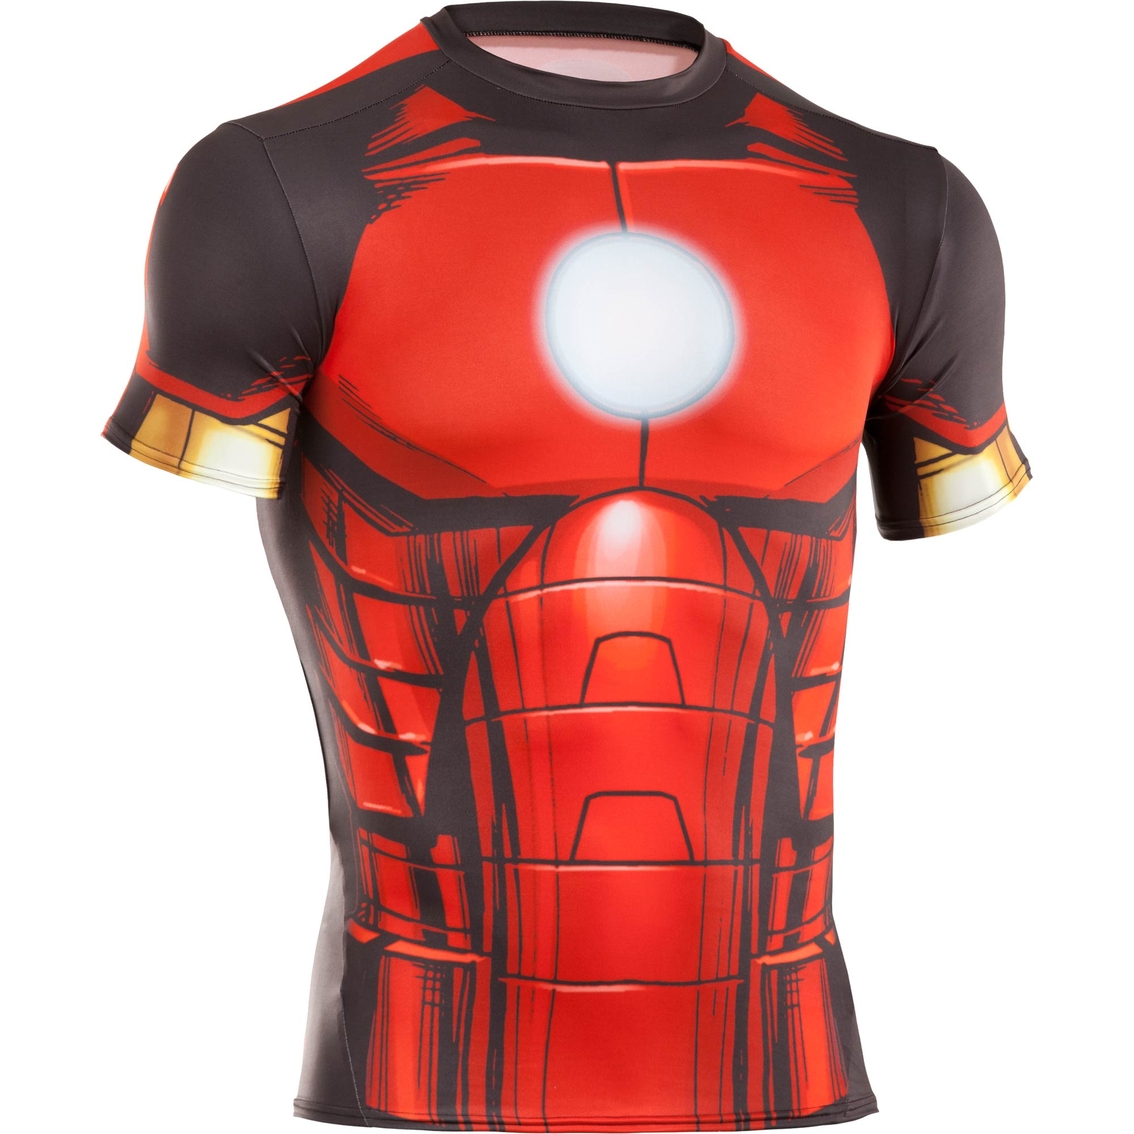 Under Armour Alter Ego Compression Iron Man Tee | T-shirts | Apparel ...